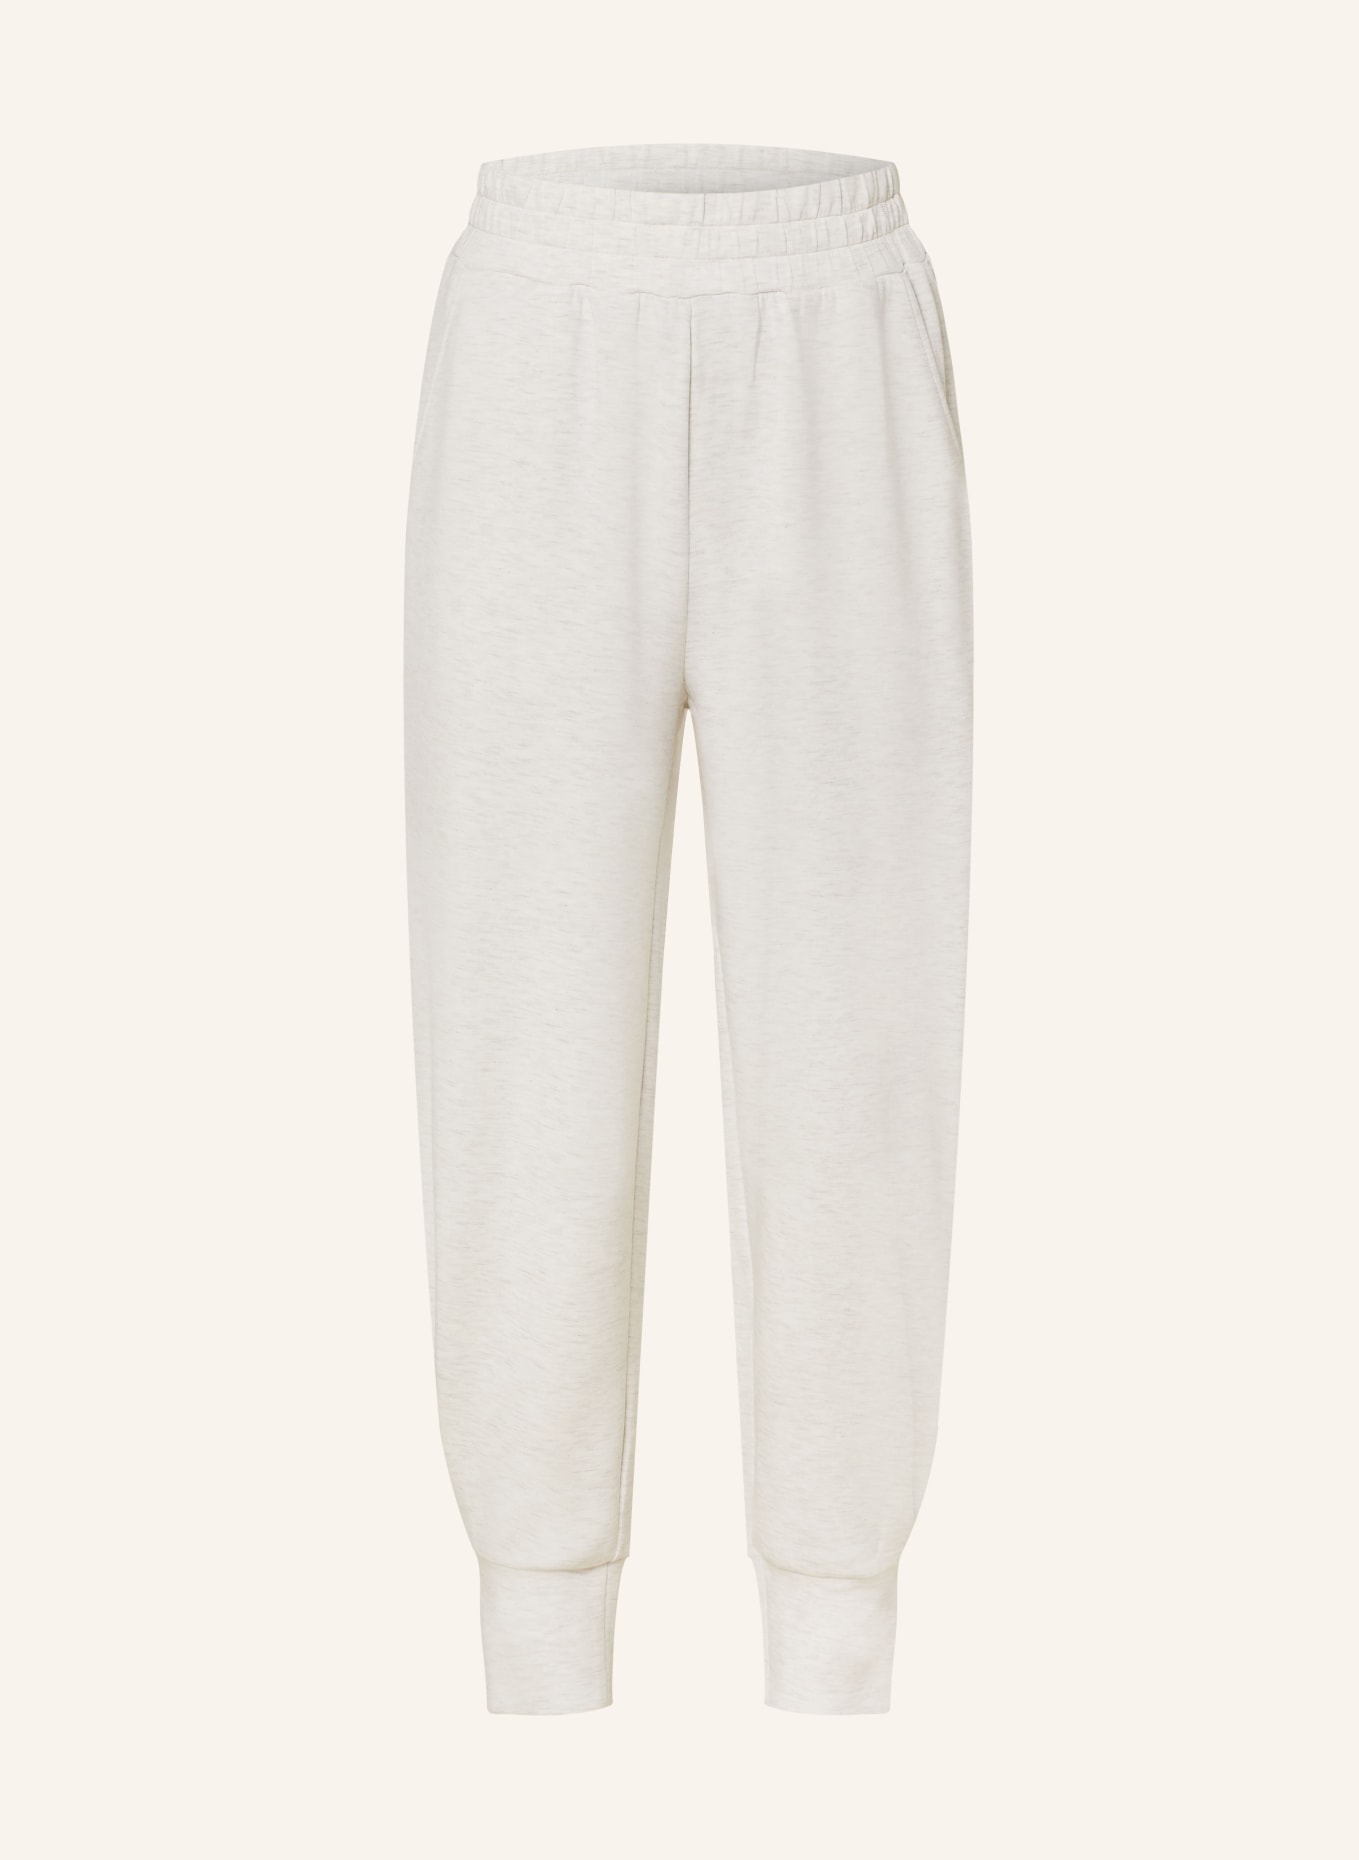 VARLEY Training pants THE RELAXED PANT 27.5, Color: LIGHT GRAY (Image 1)